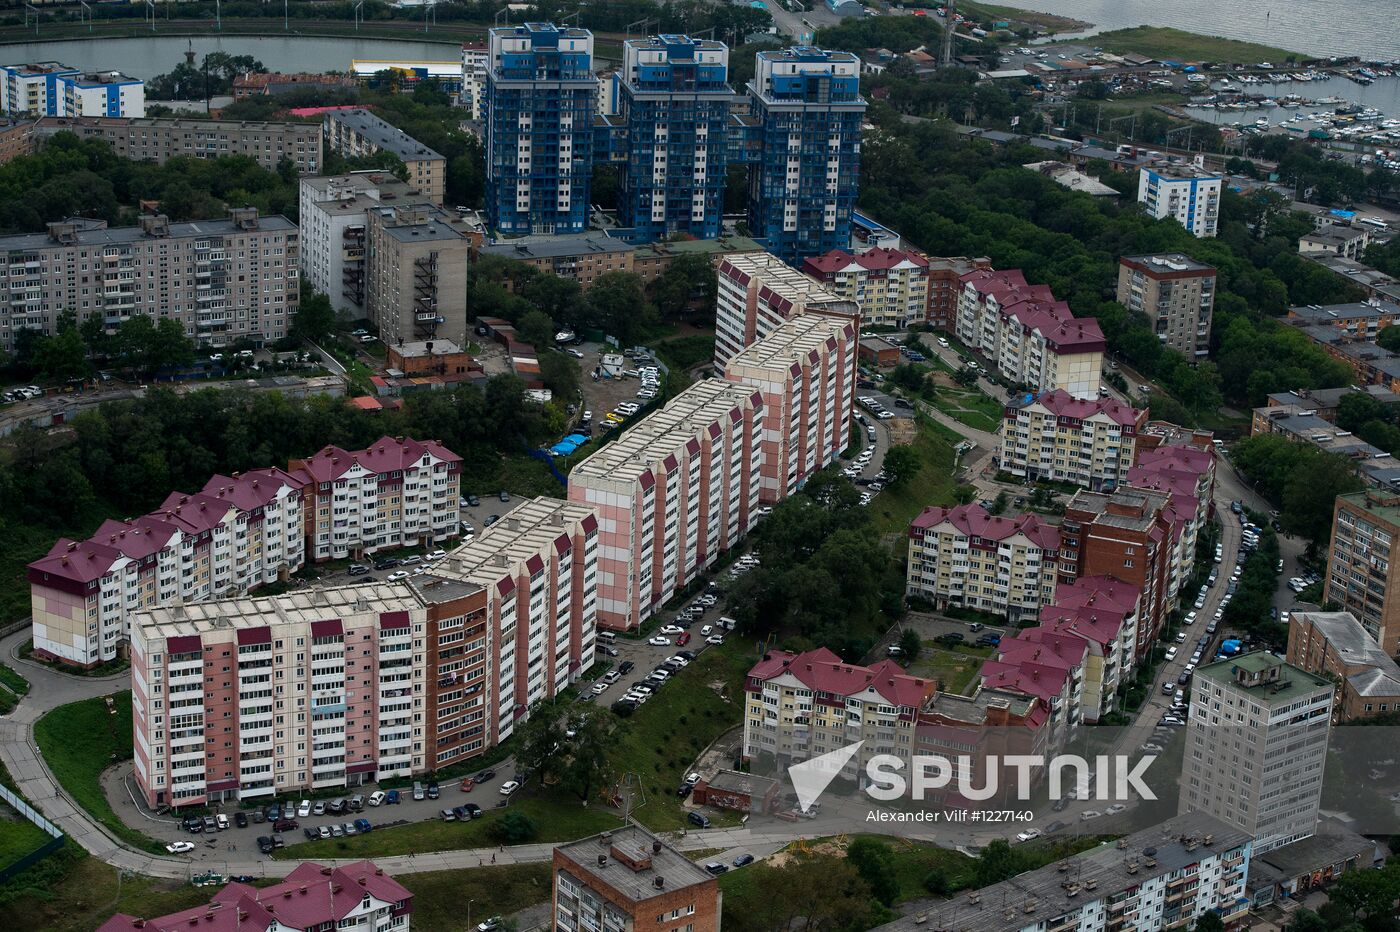 Vladivostok and Russky Island as seen from helicopter